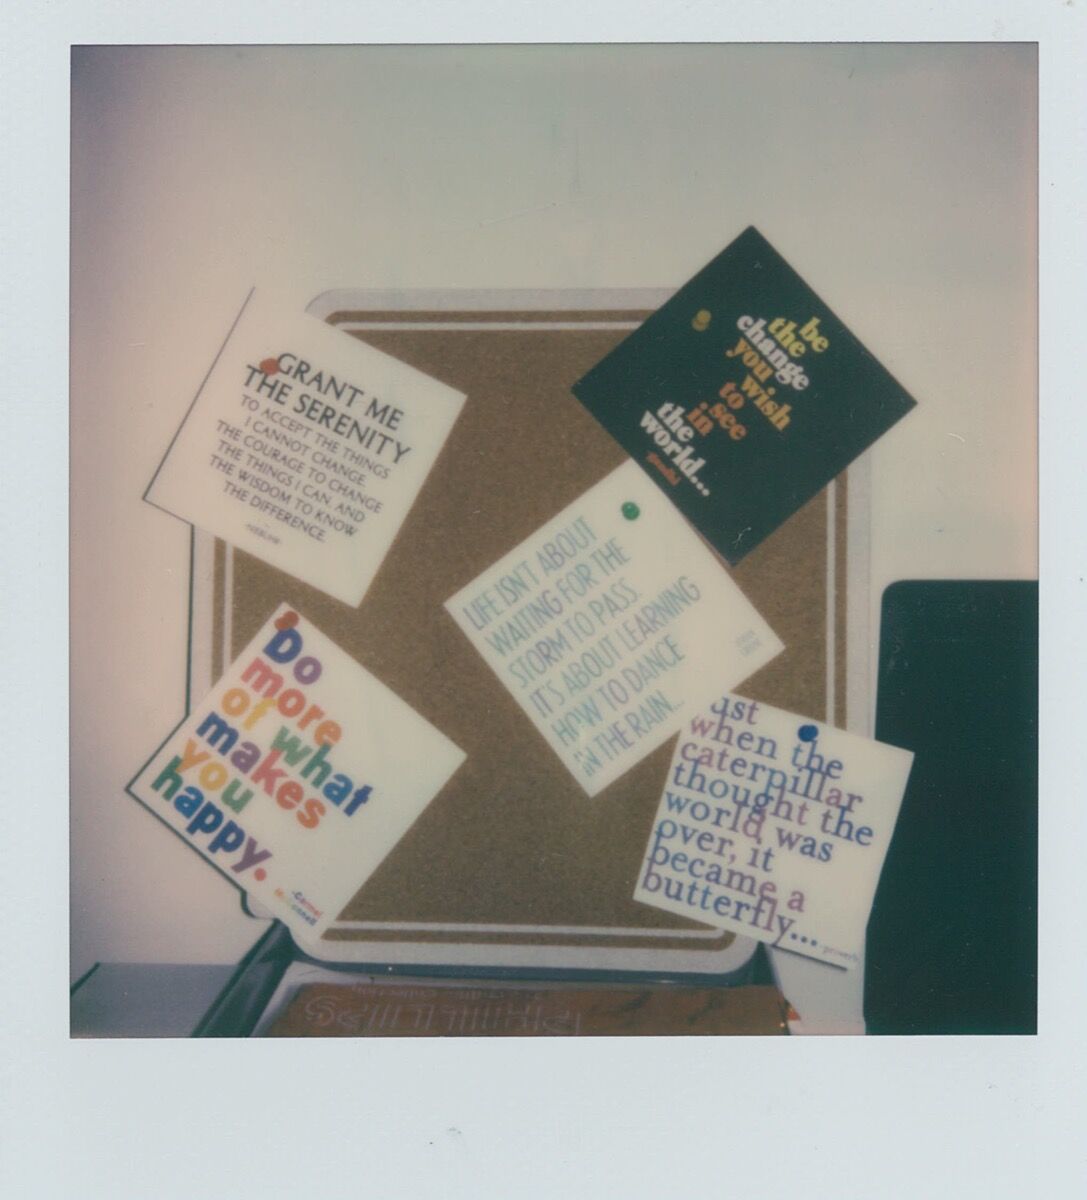 Cheerful postcards pinned to a small pinboard above Clay’s desk feature positive affirmations: “Be the change you wish to see…,” “Grant me the serenity….”